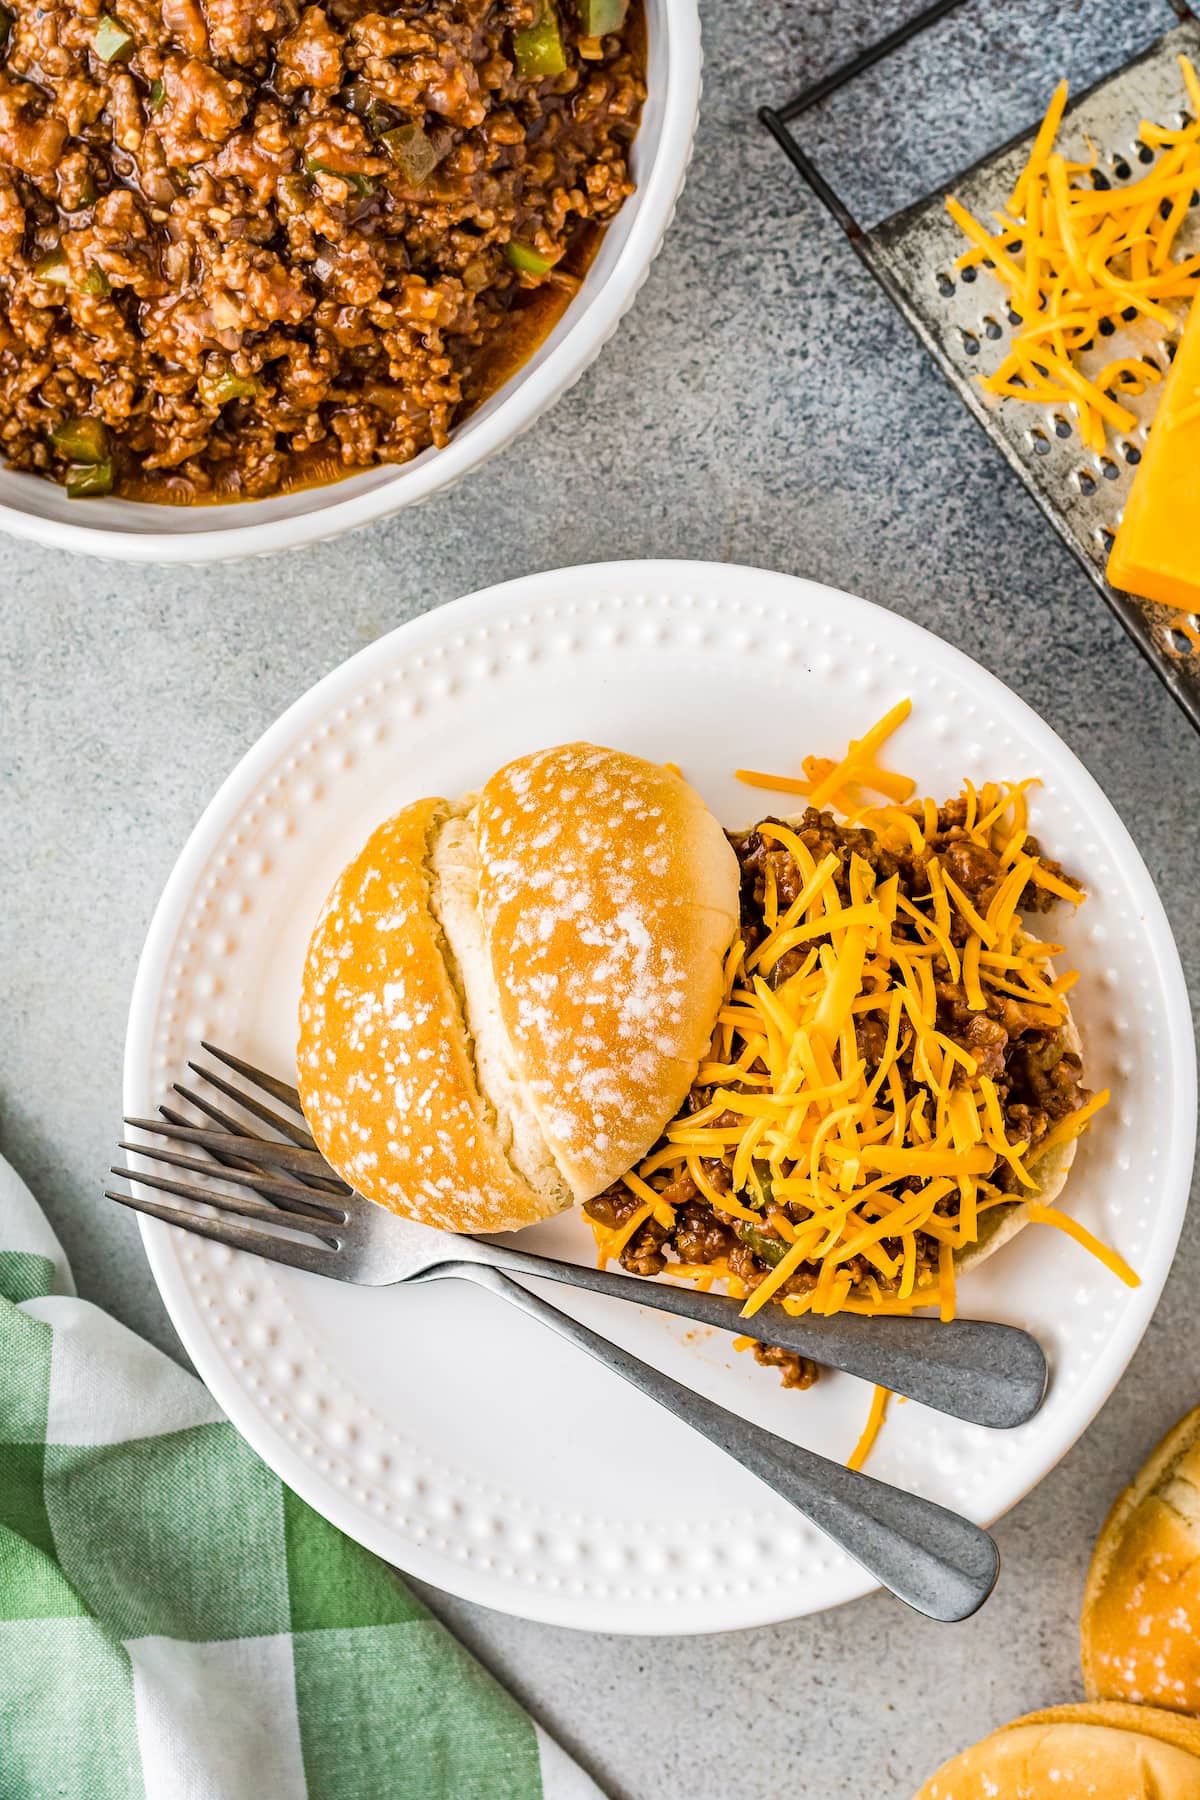 Sloppy Joe sandwich with beef, meat sauce, and shredded cheese on a plate with a fork